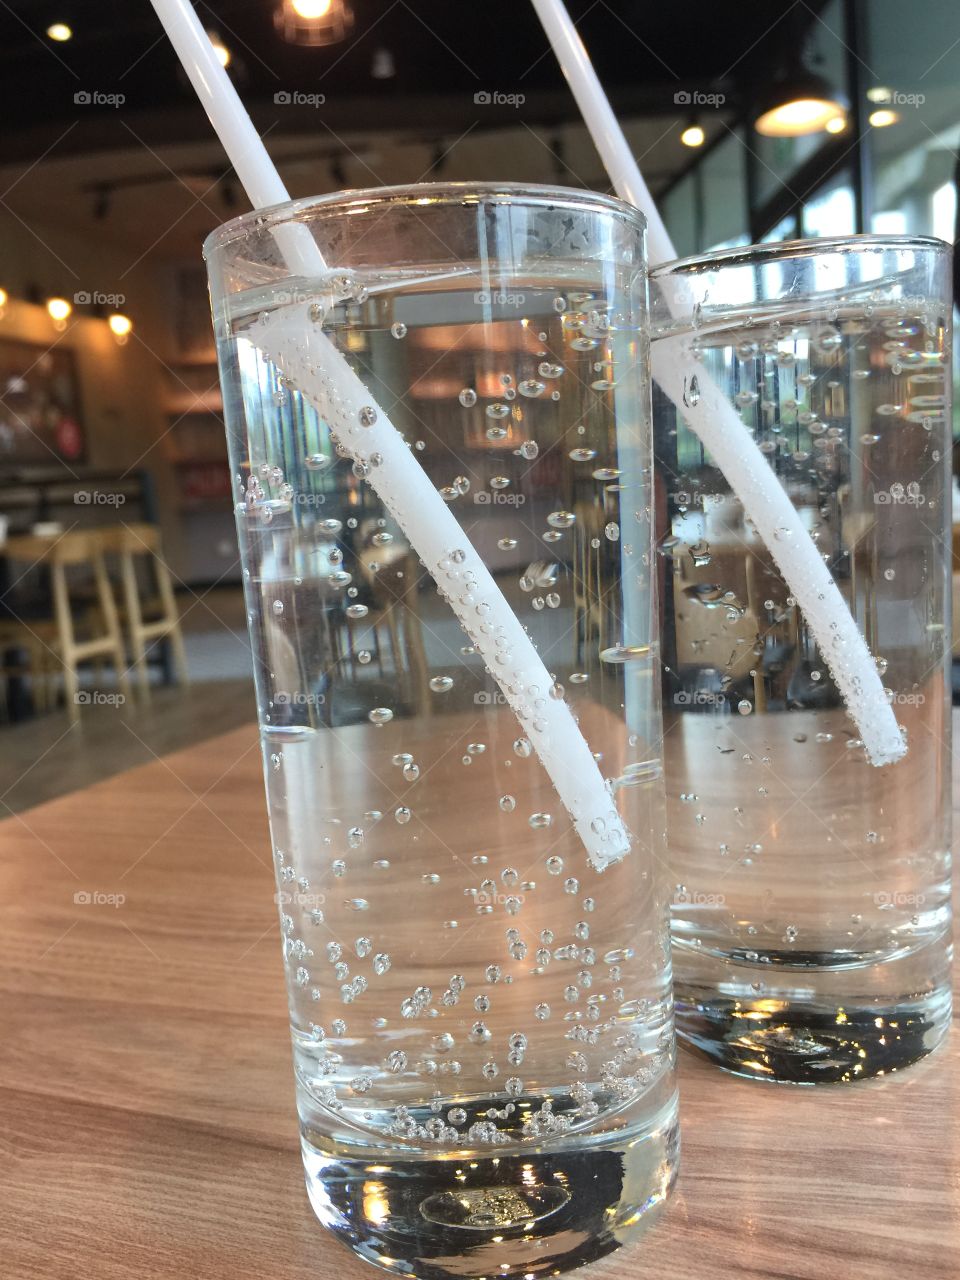 Hot summer~ on a side note , will not use straws in future! #savetheenvironment